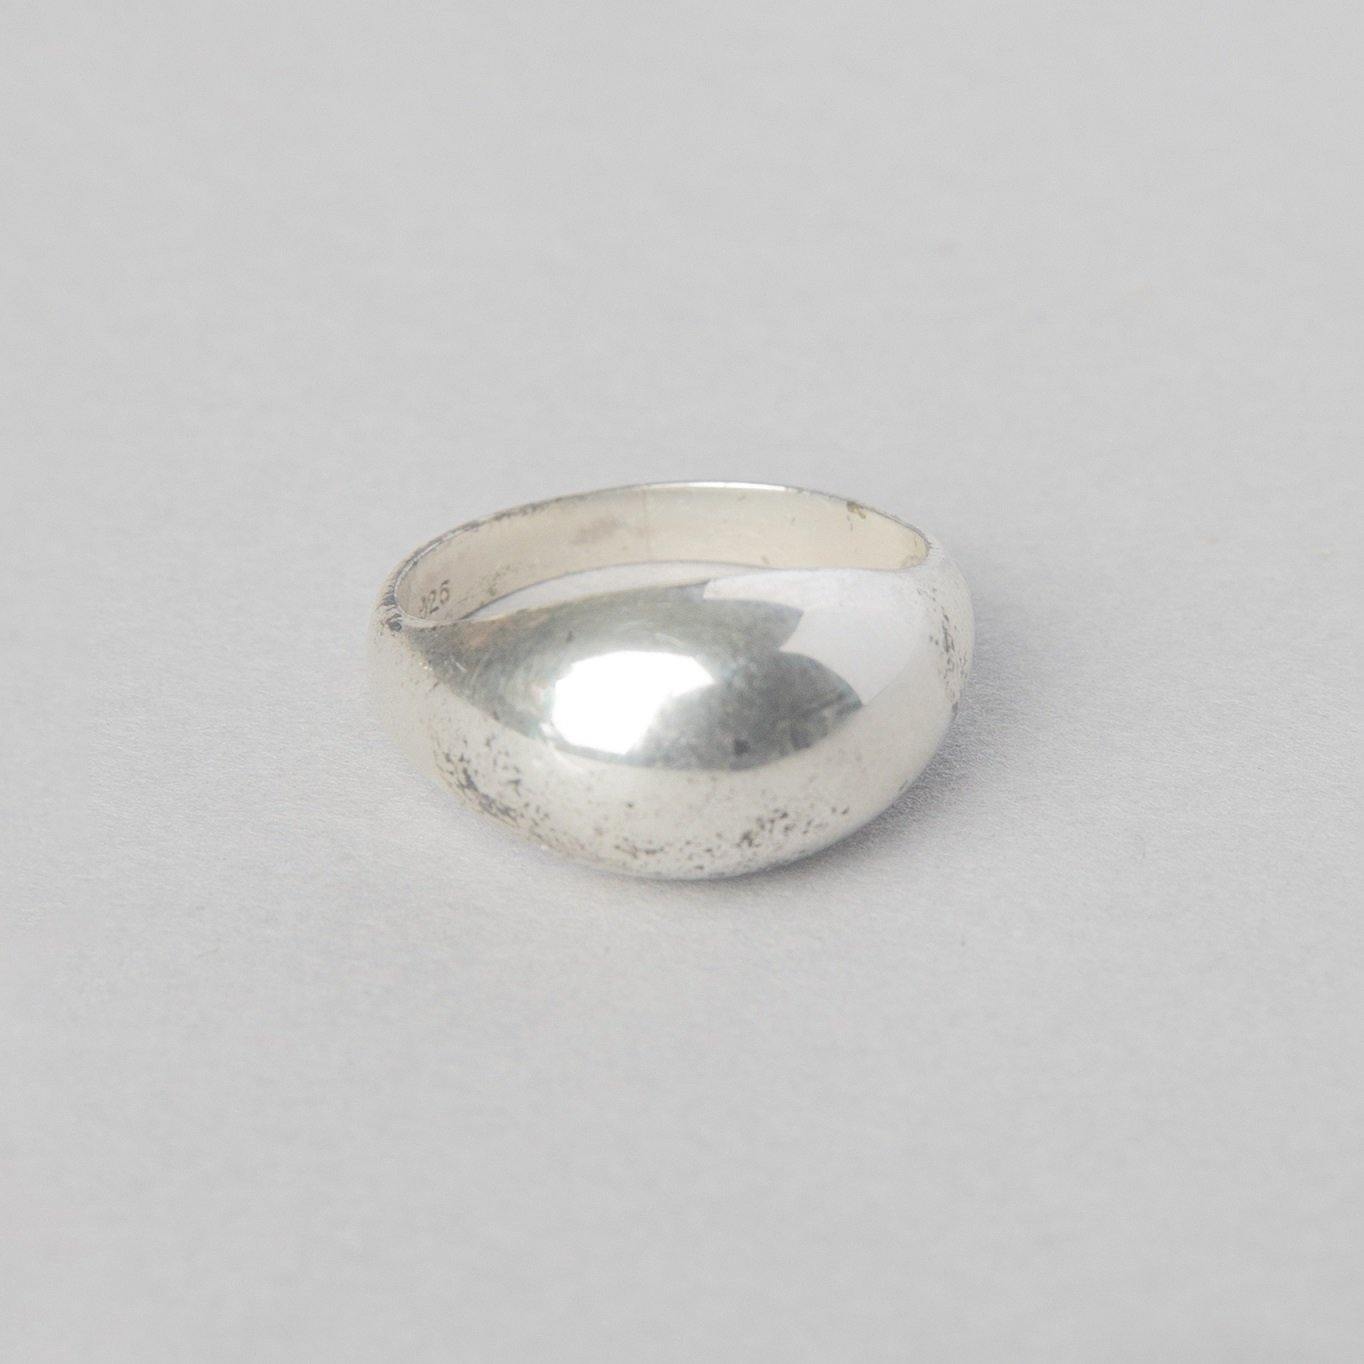 XL DOME RING STERLING - bobbie carr